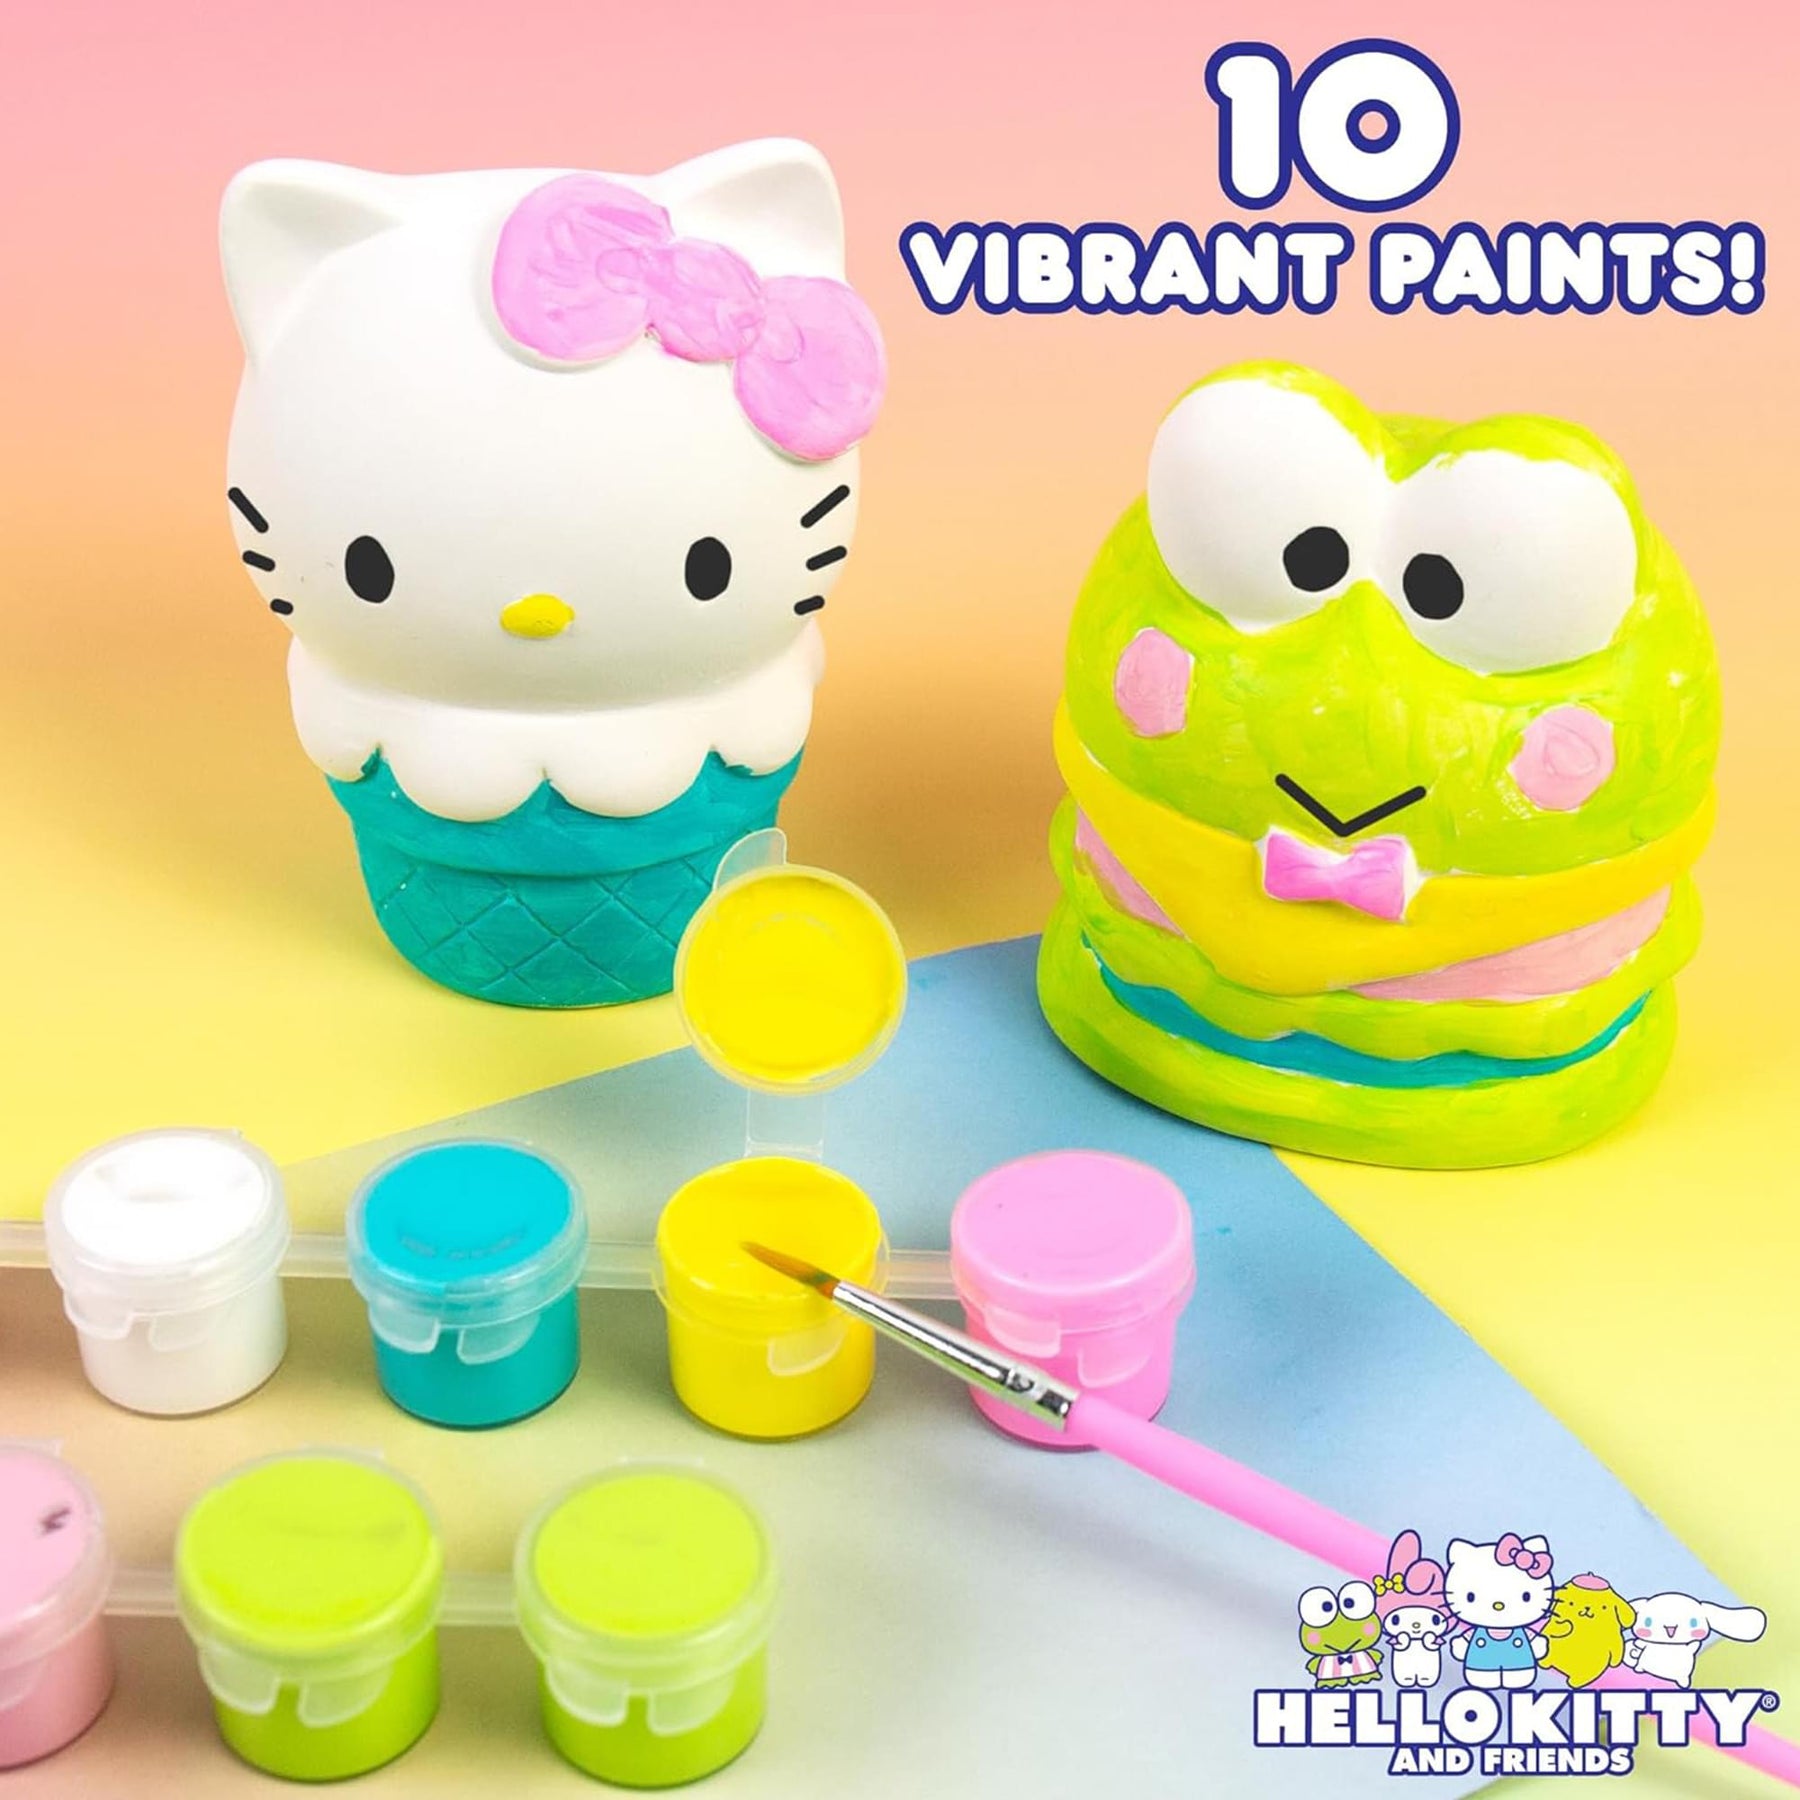 Sanrio Hello Kitty and Friends Paint Your Own Figurines Kit